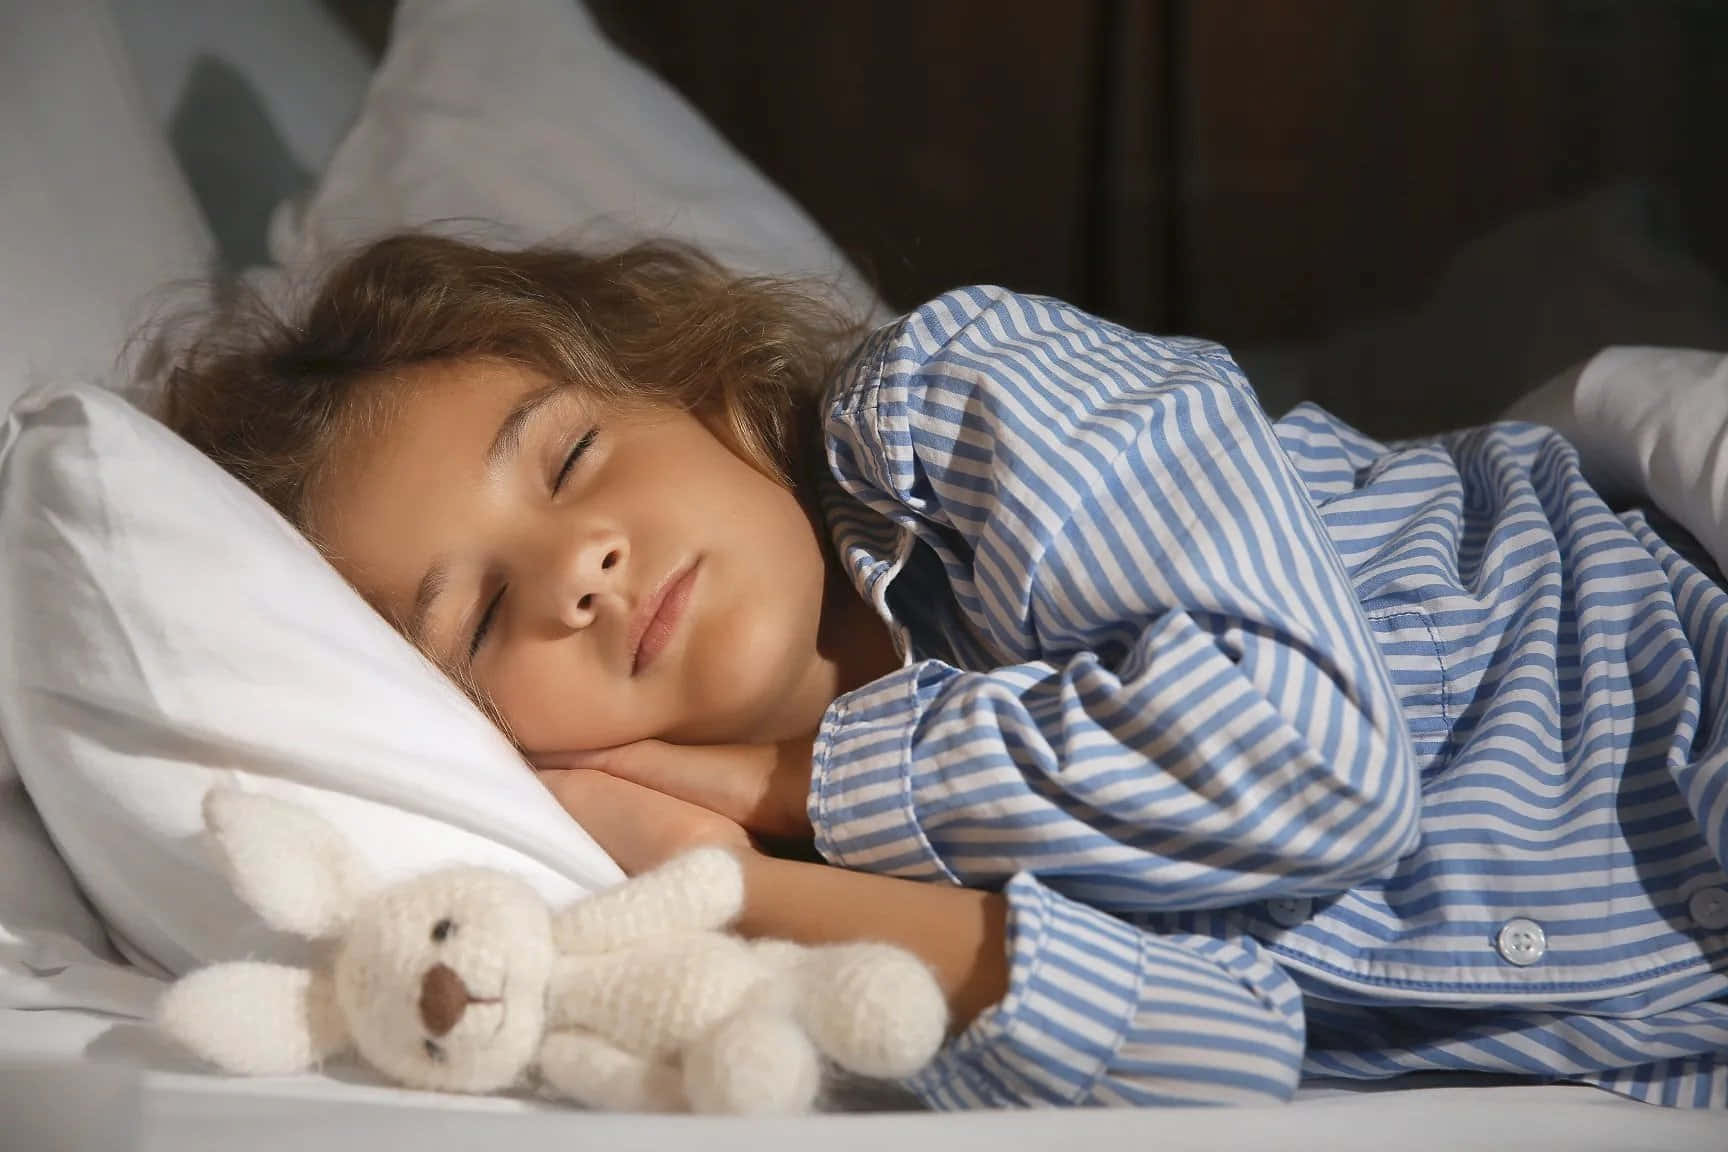 A Young Girl Sleeping In Bed With A Stuffed Animal